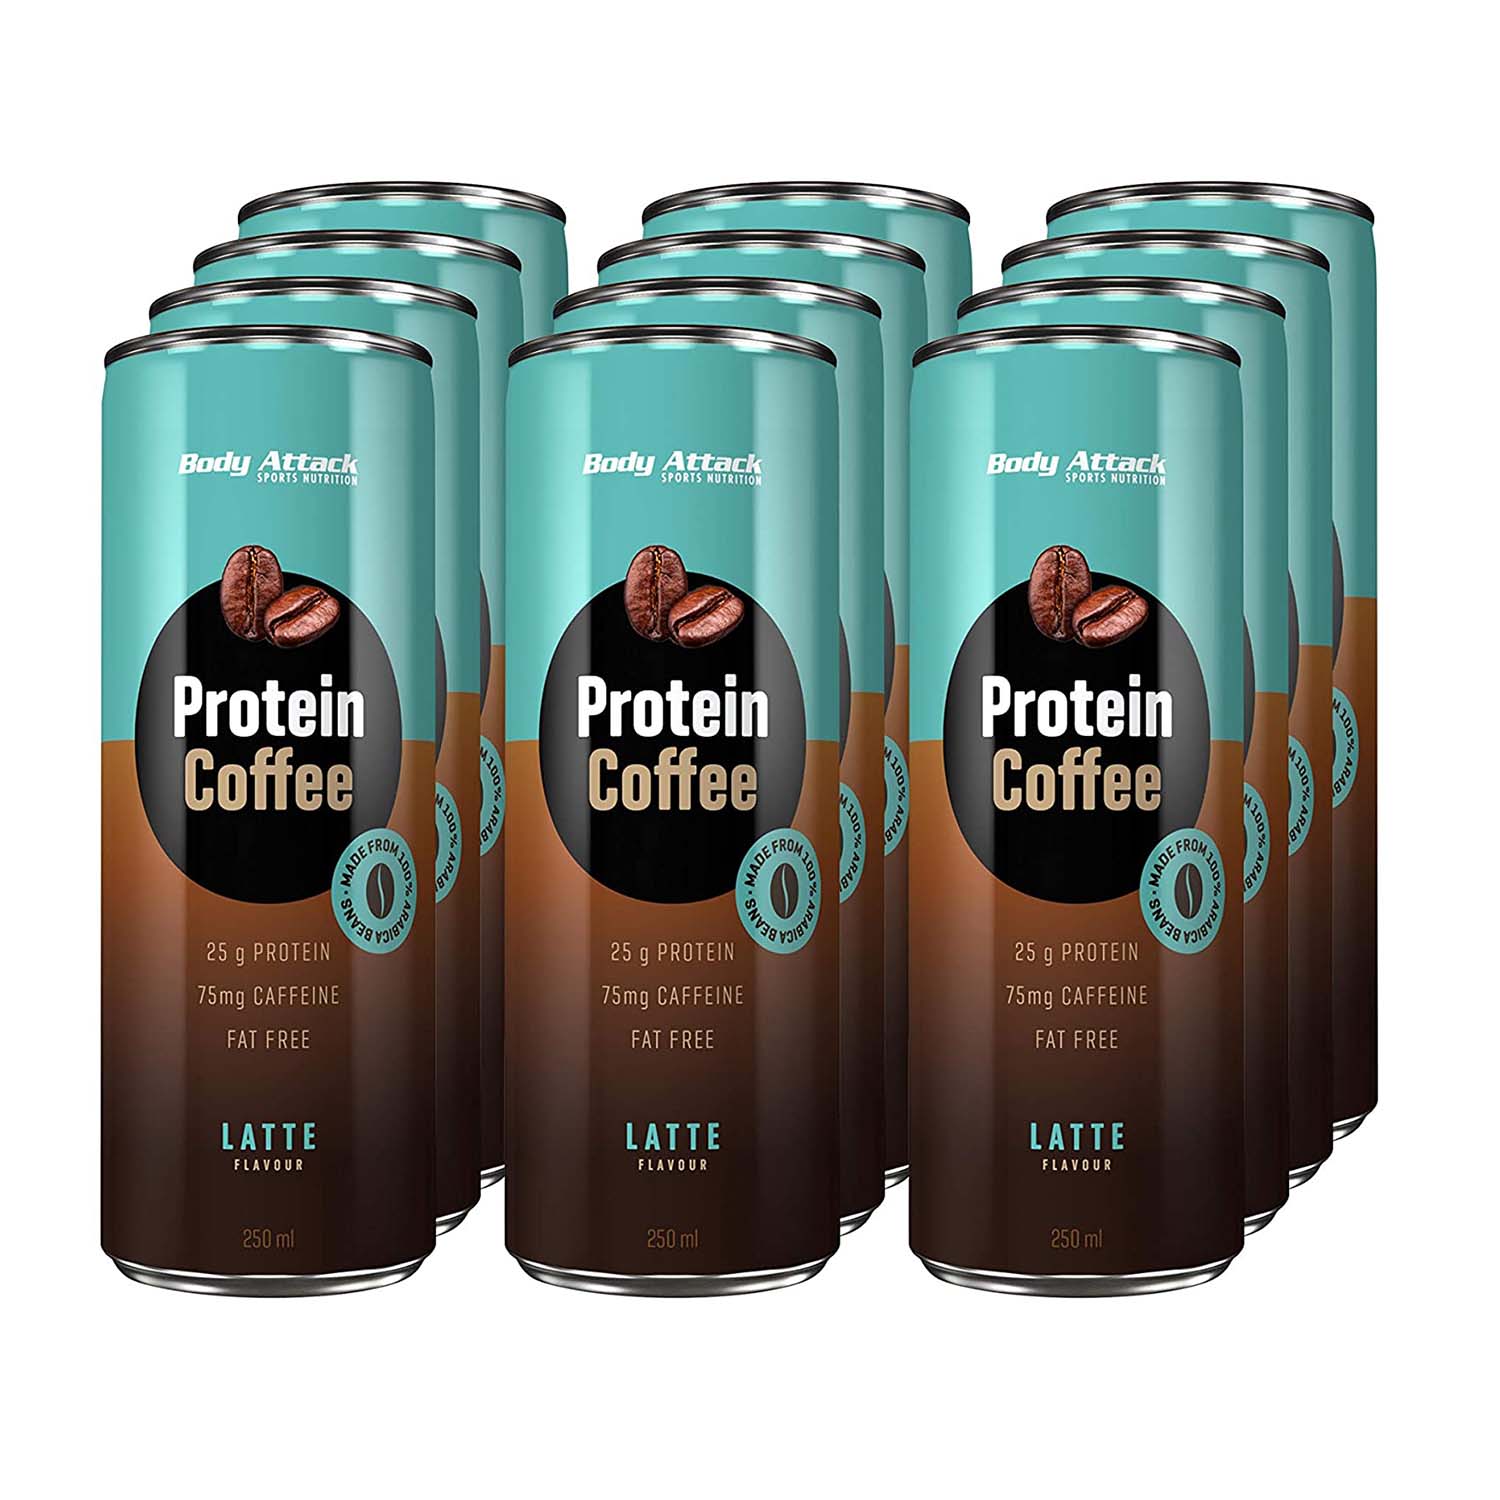 Body Attack Protein Coffee Box of 12 Pieces Latte